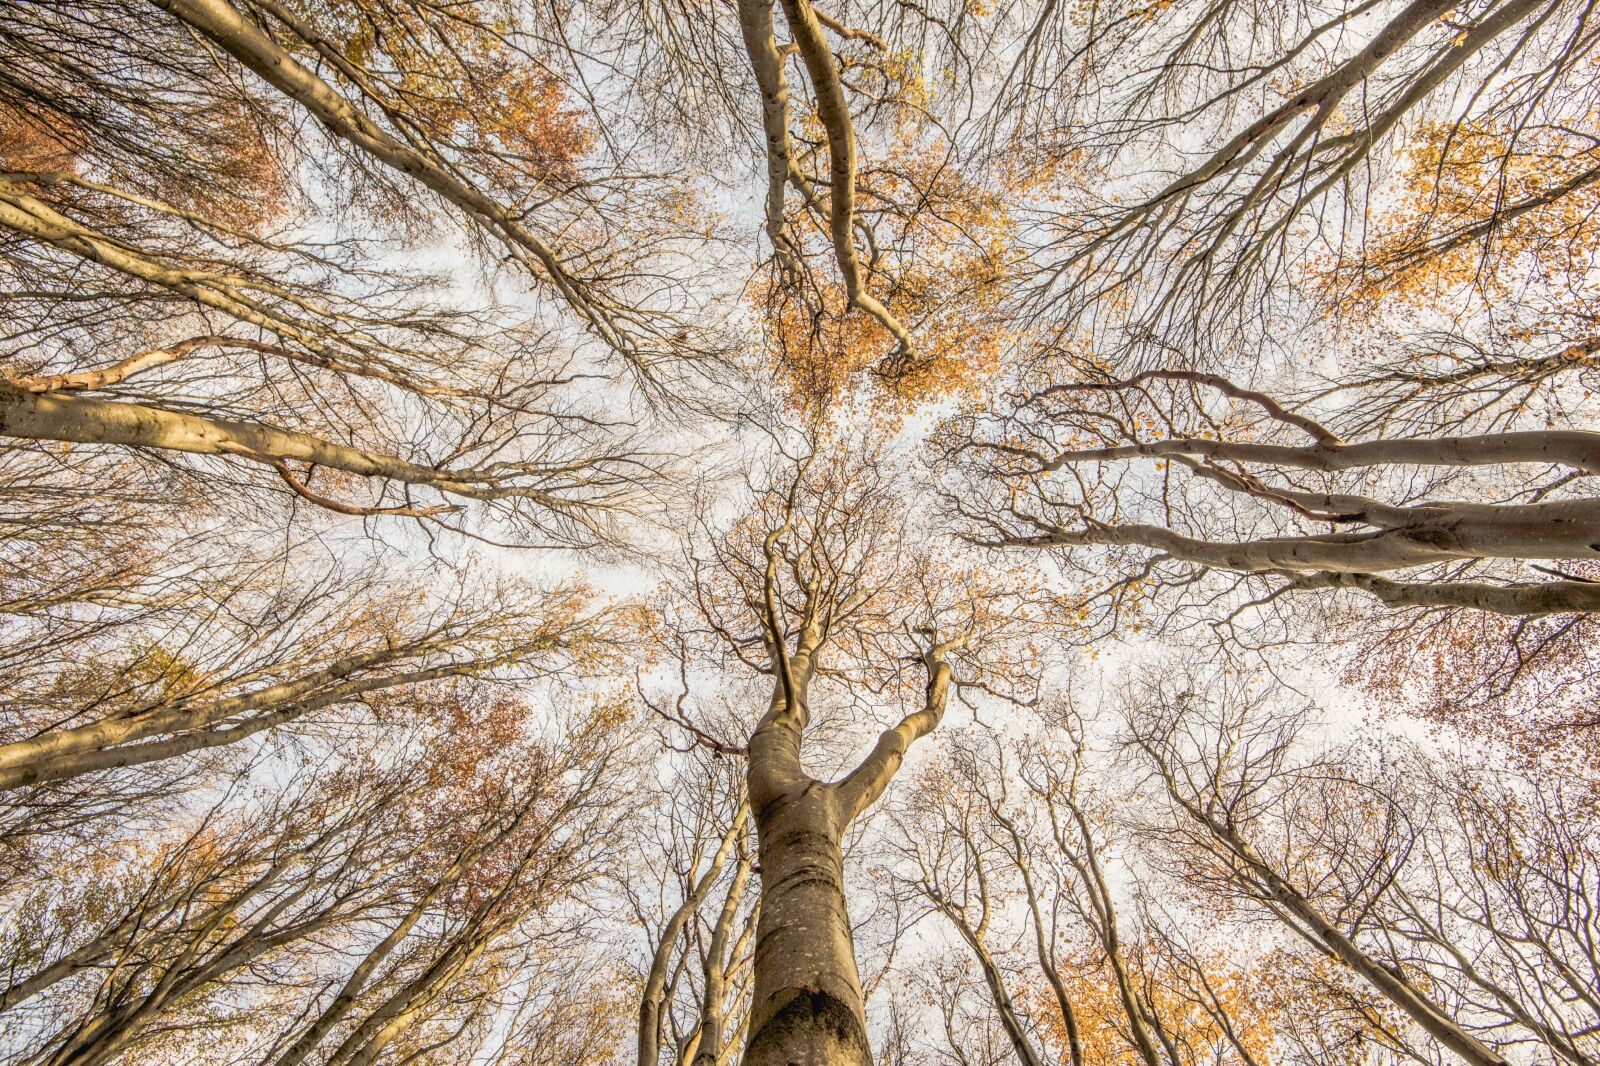 Beech trees in East Lothian, Scotland one of the submissions to British Wildlife Photography Awards 2024